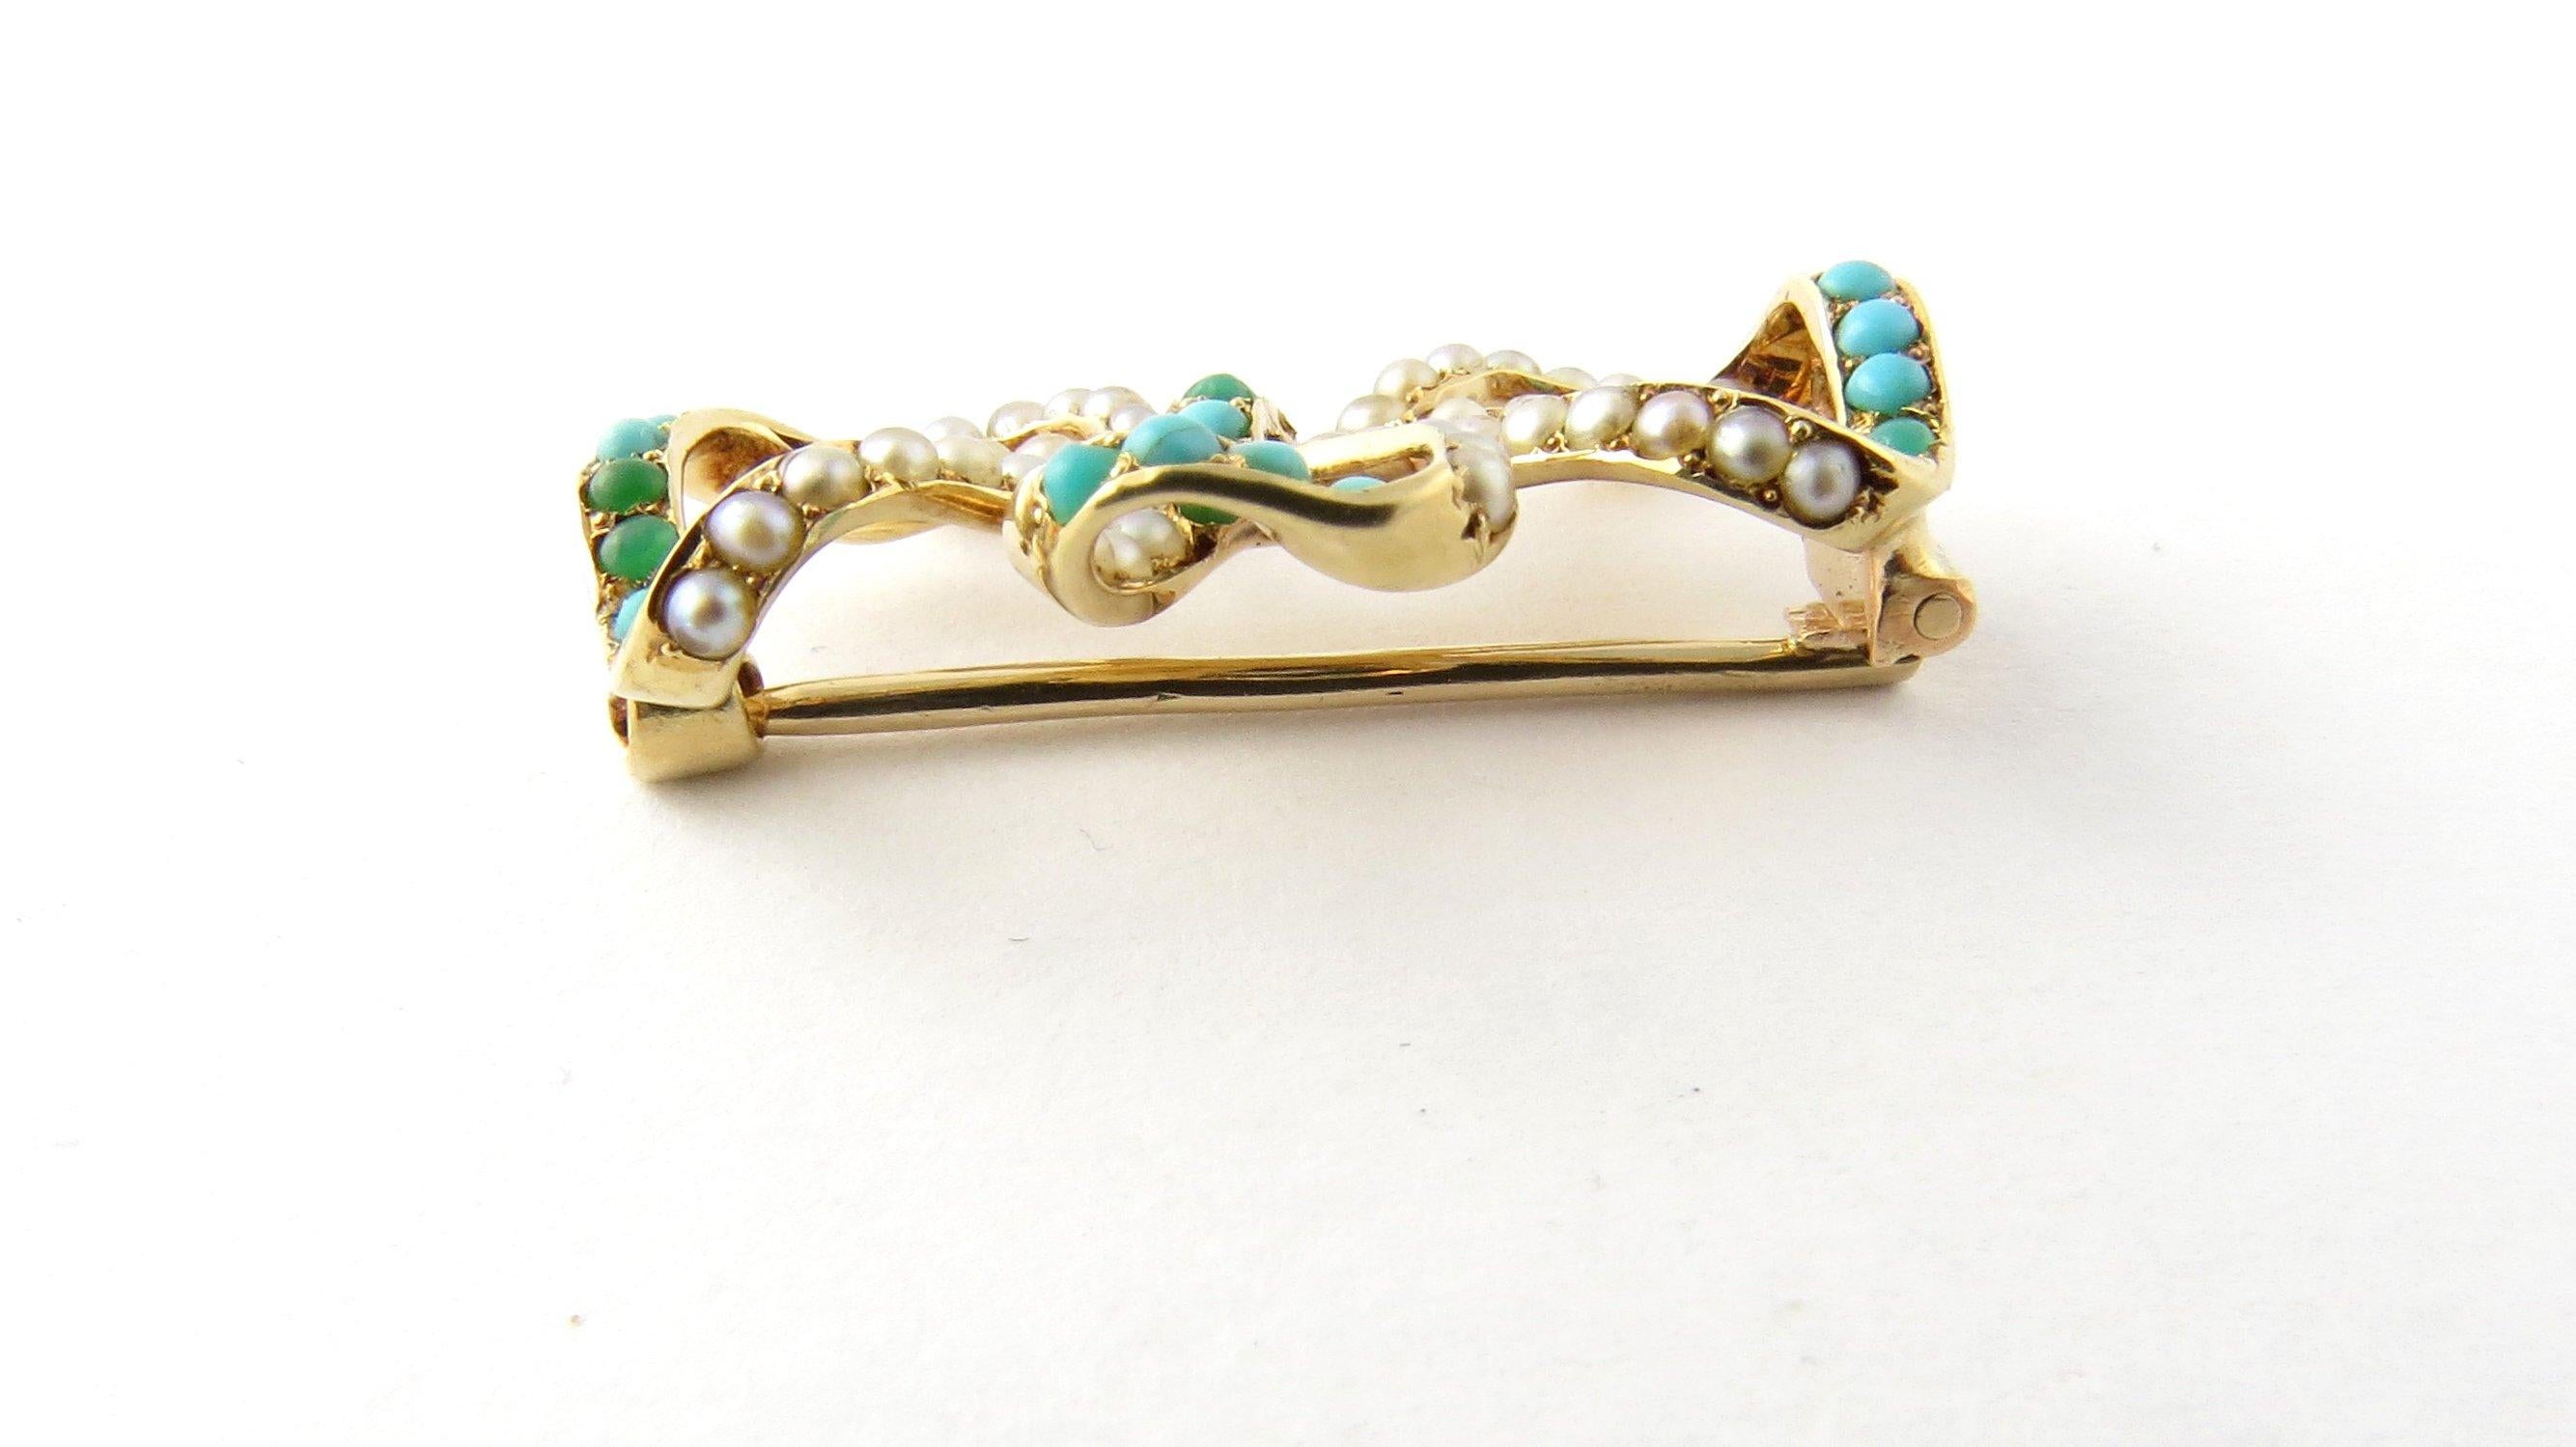 Vintage 14 Karat Yellow Gold Seed Pearl and Turquoise Bow Brooch/Pin
This exquisite brooch features a lovely bow detailed with 46 seed pearls and 22 turquoise stones. 
Size: 18 mm x 26 mm 
Weight: 1.9 dwt. / 3.1 gr. 
Acid tested for 14K gold. 
Very